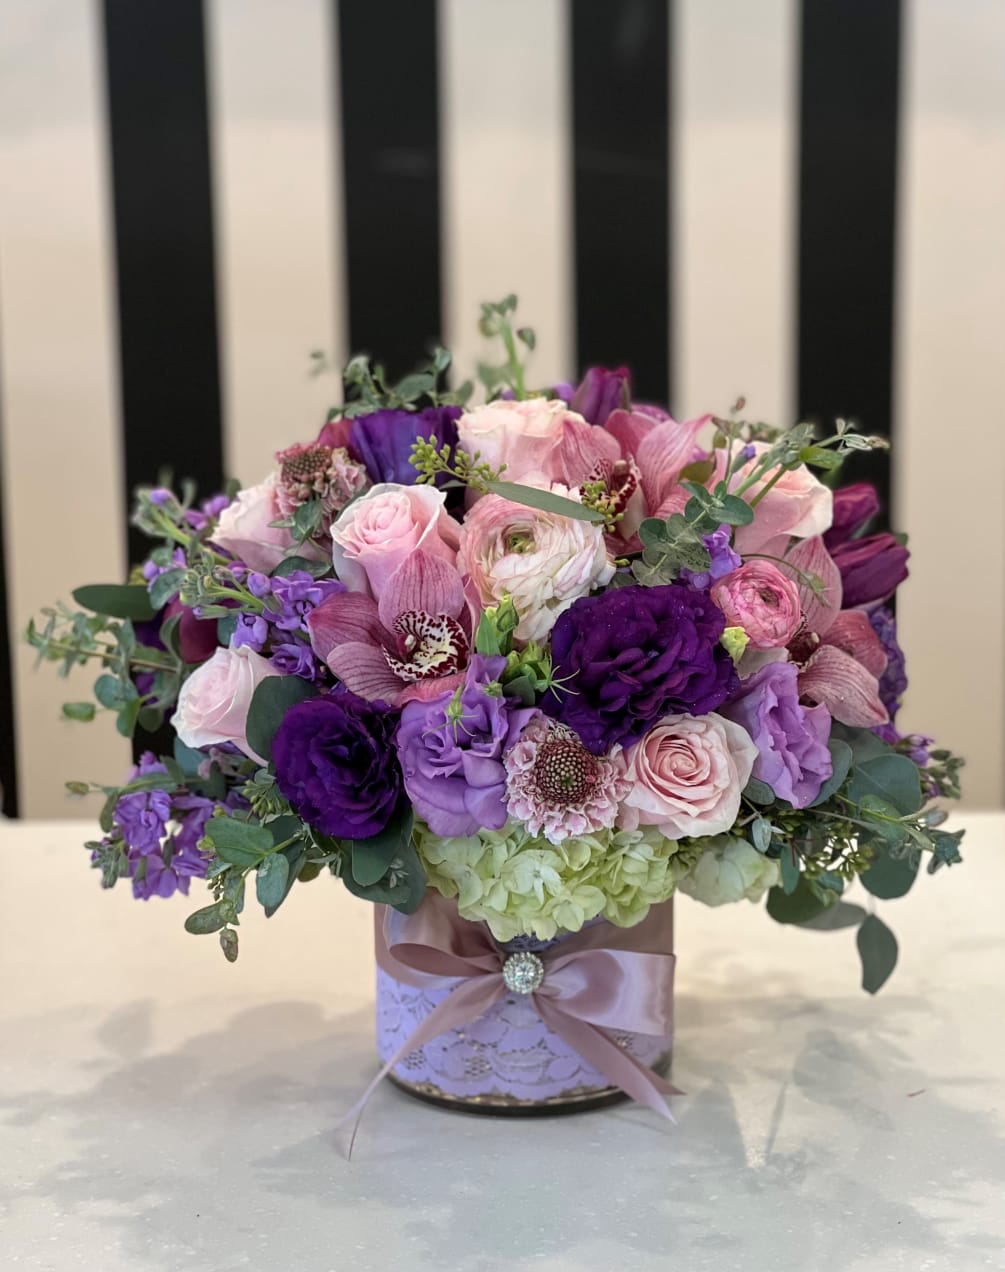 A variety of beautiful purple and pink flowers in a vase covered